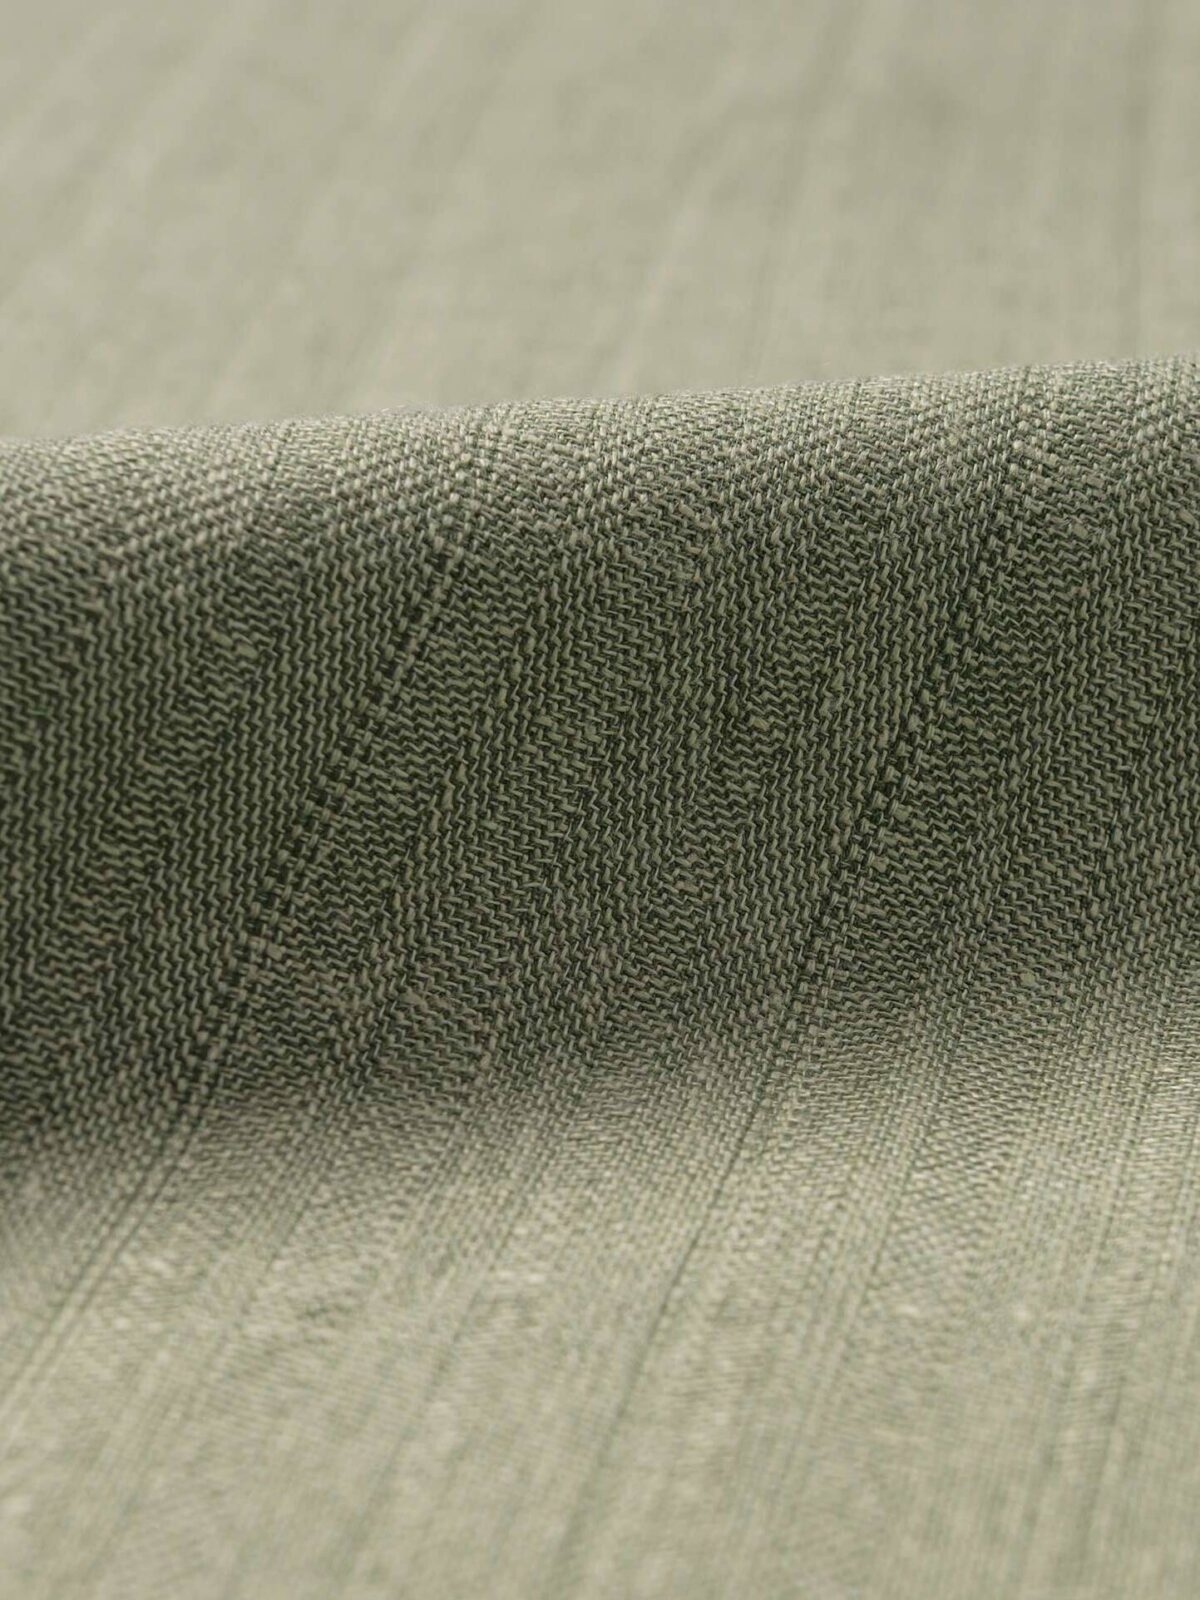 dobby weave fabric, Roll Length : 10 Mtrs, 20 Mtrs, Specialities